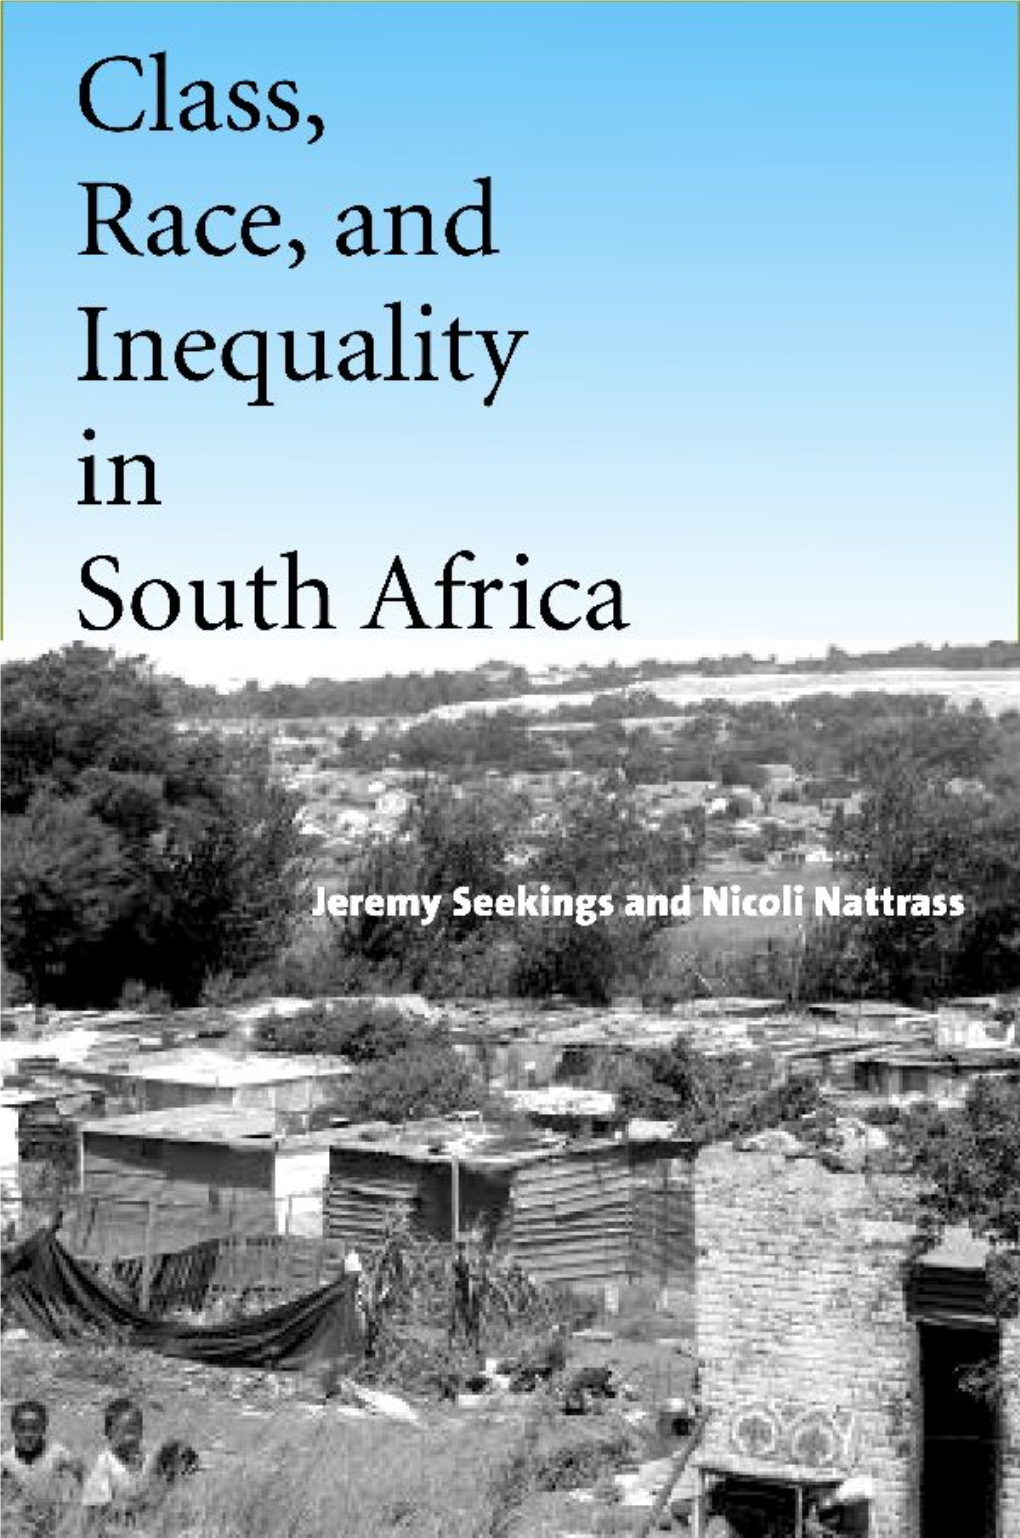 Class, Race, and Inequality in South Africa